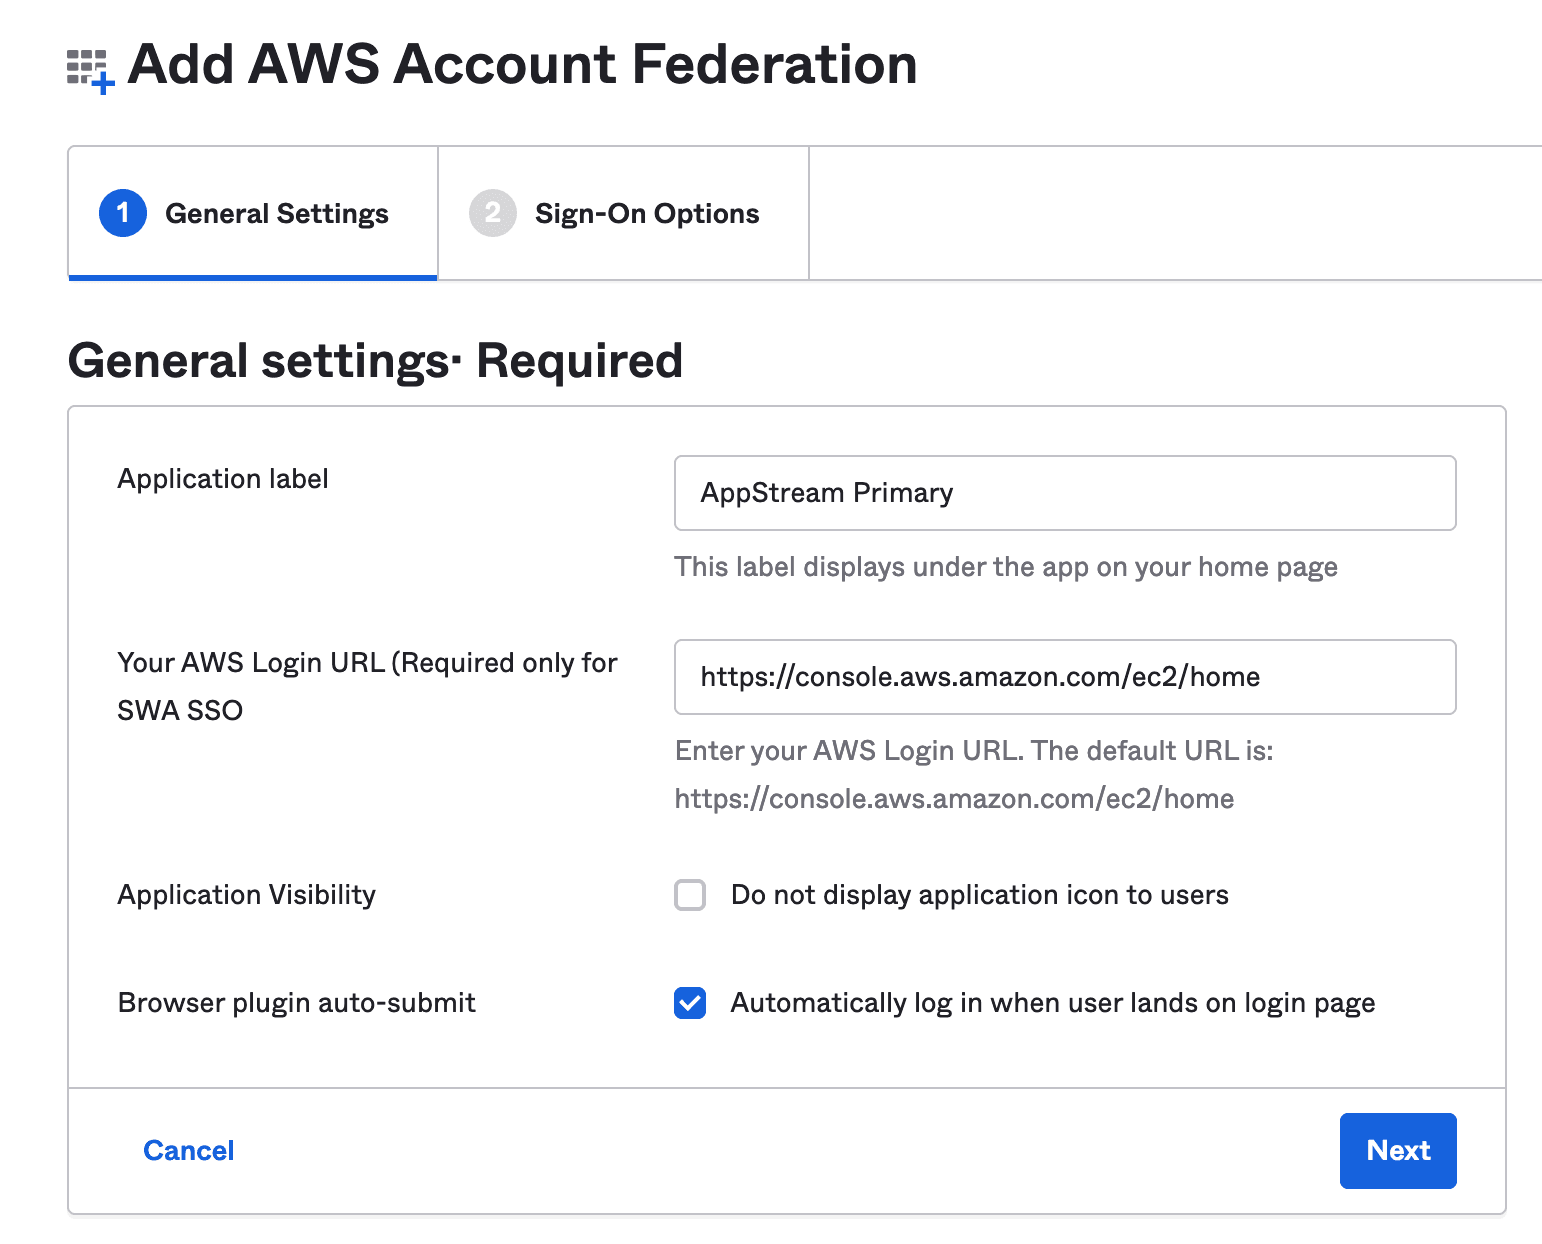 Add AWS Account Federation, under general settings then application label value is AppStream Primary